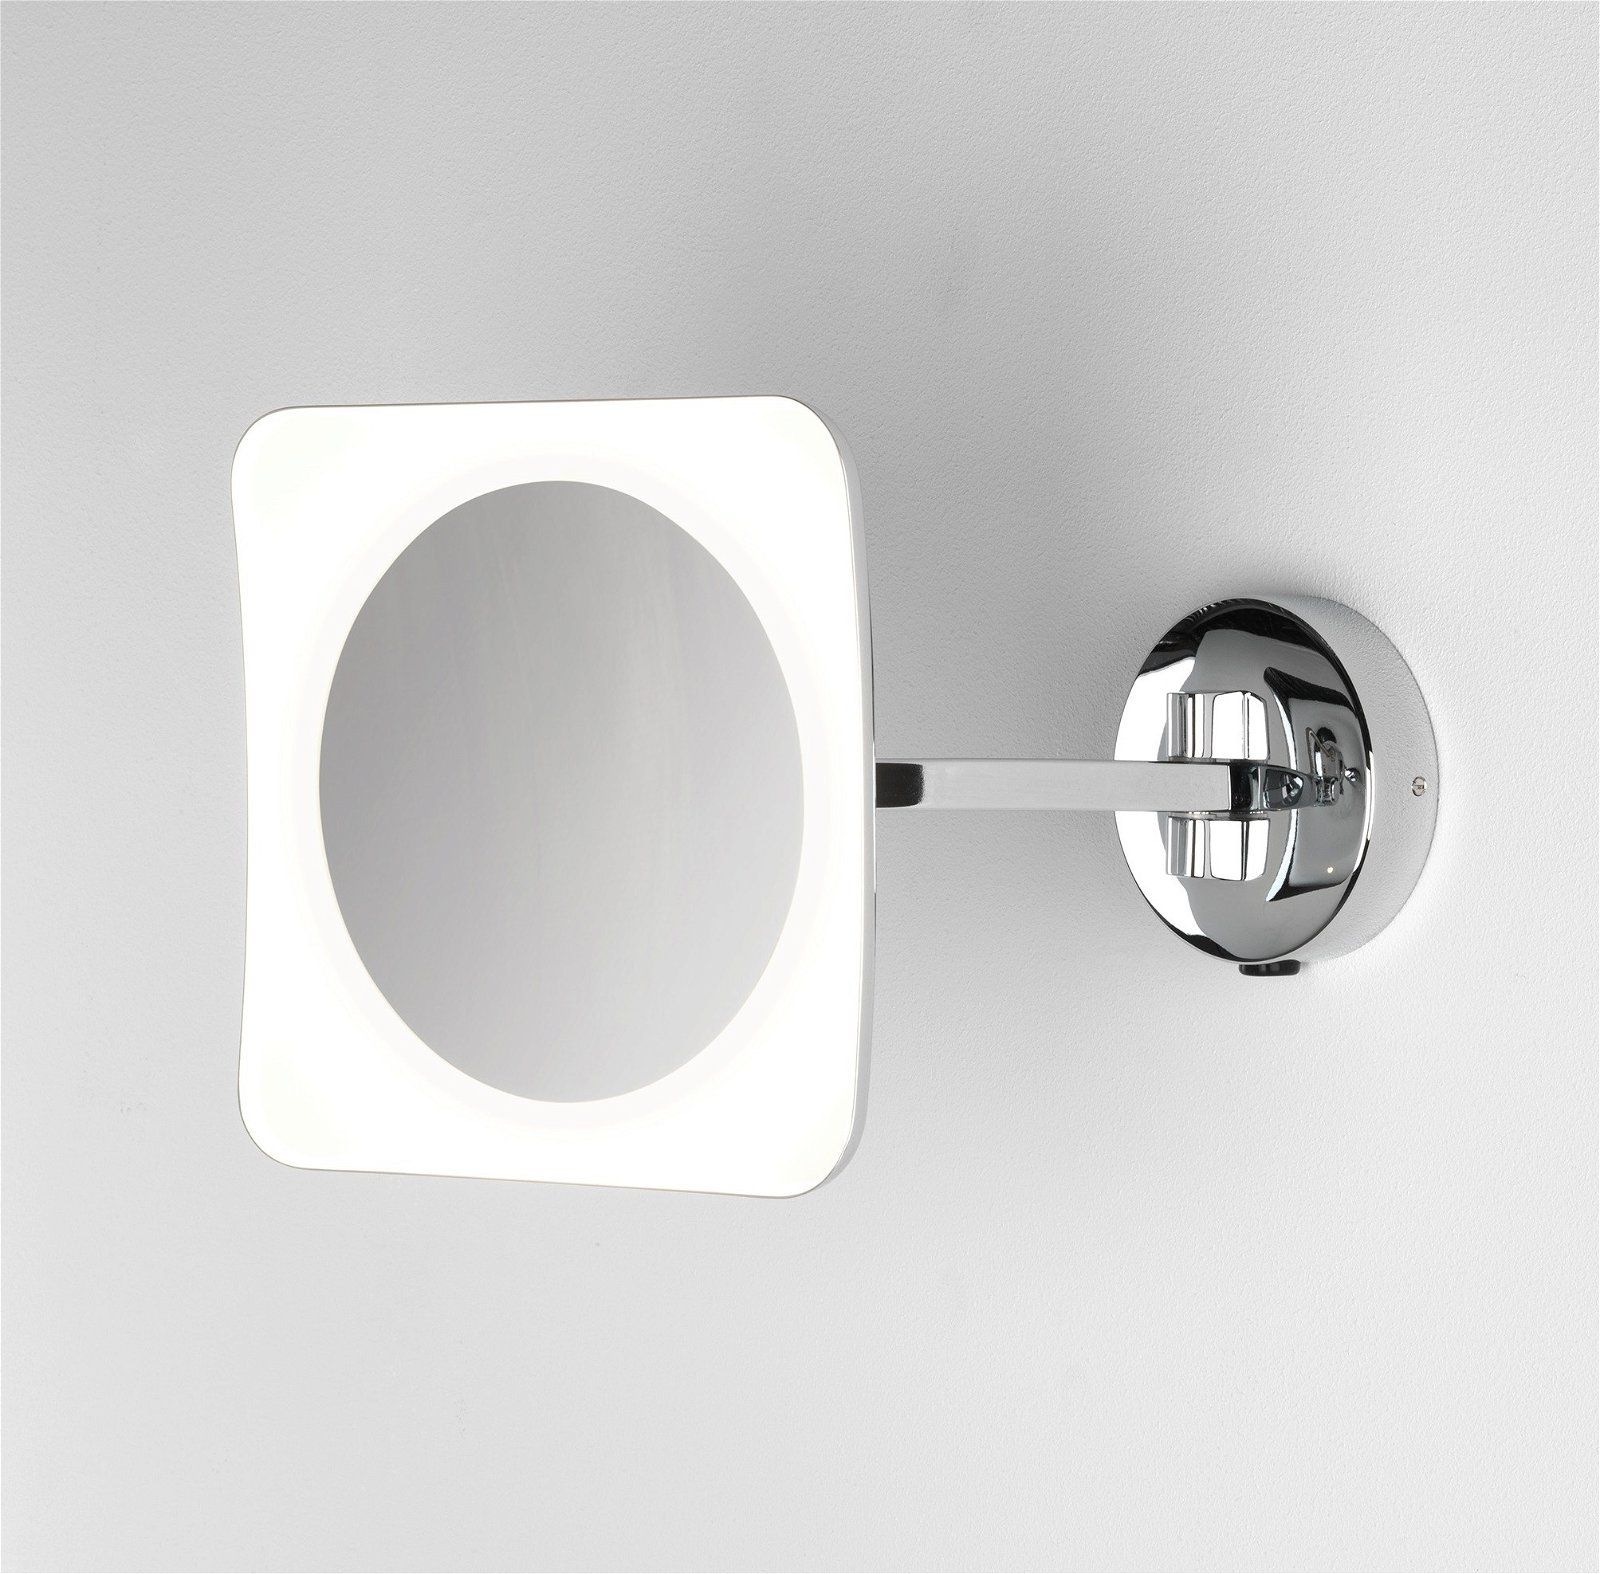 Polished Chrome Tilt Wall Mirrors Throughout Best And Newest Astro Lighting – Mascali Square Led 1373003 (7968) – Ip44 Polished (View 11 of 15)